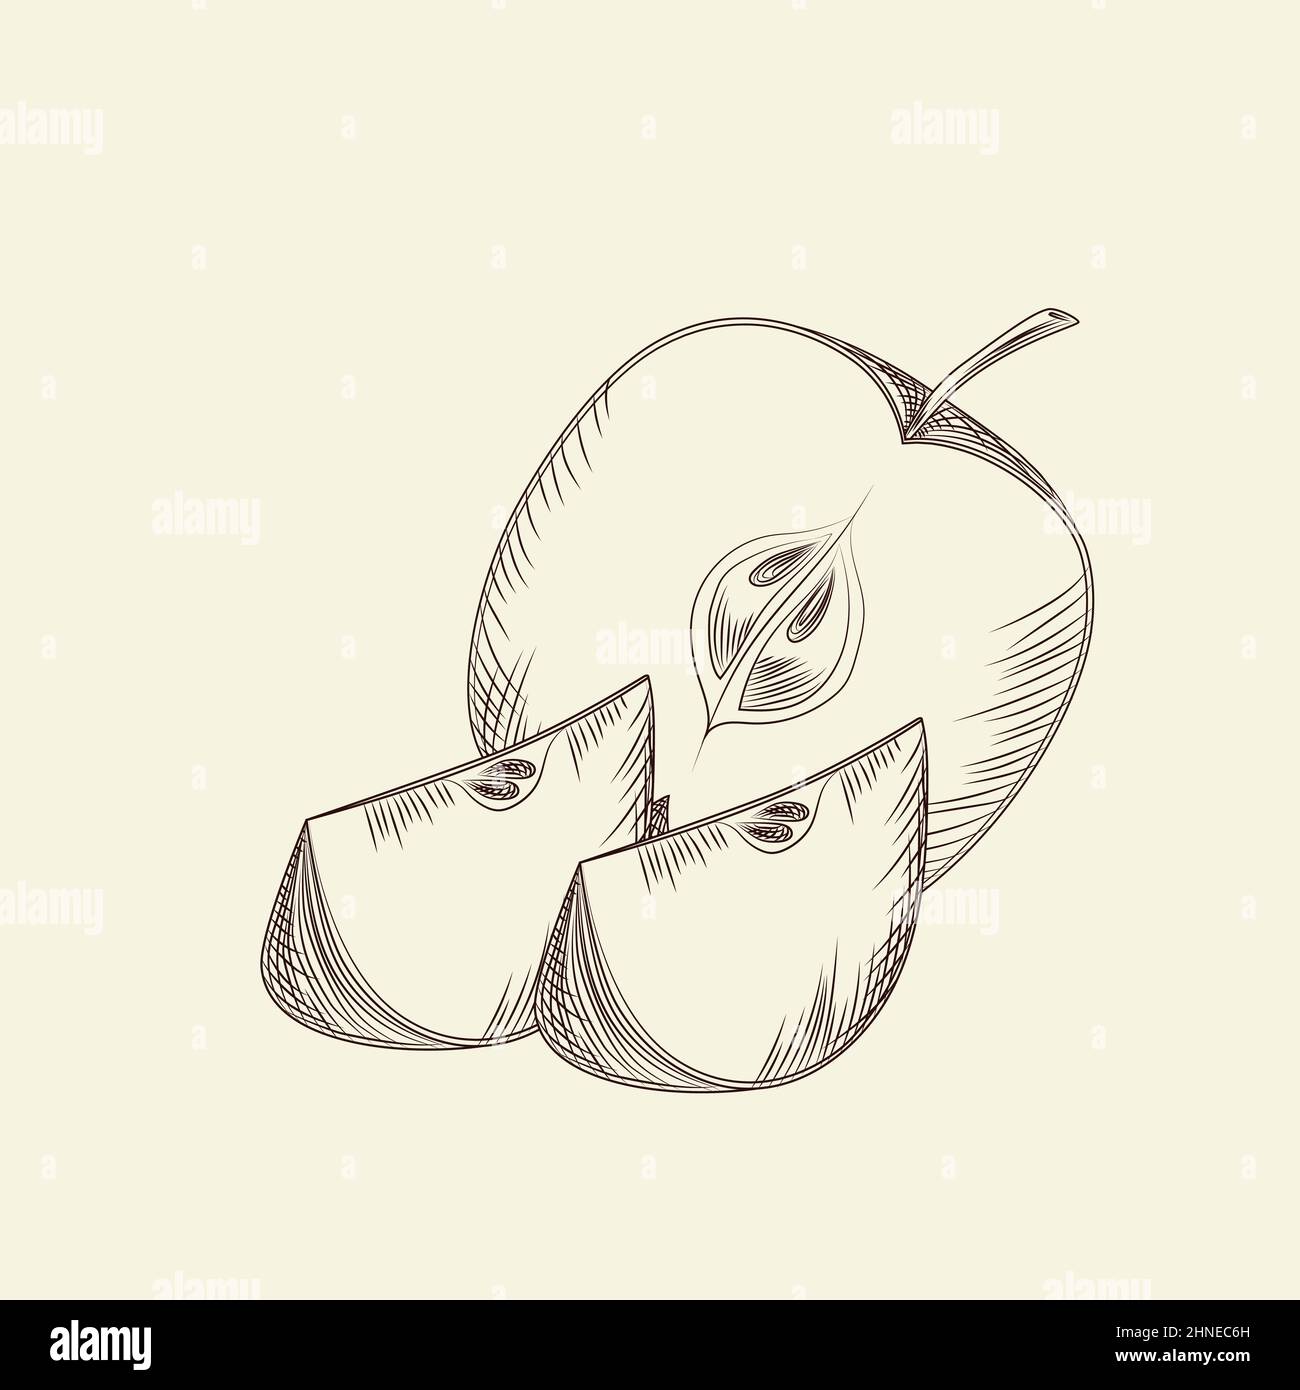 Hand drawn apple. Ripe sliced apples isolated on background. Engraving vintage style. Vector illustration Stock Vector